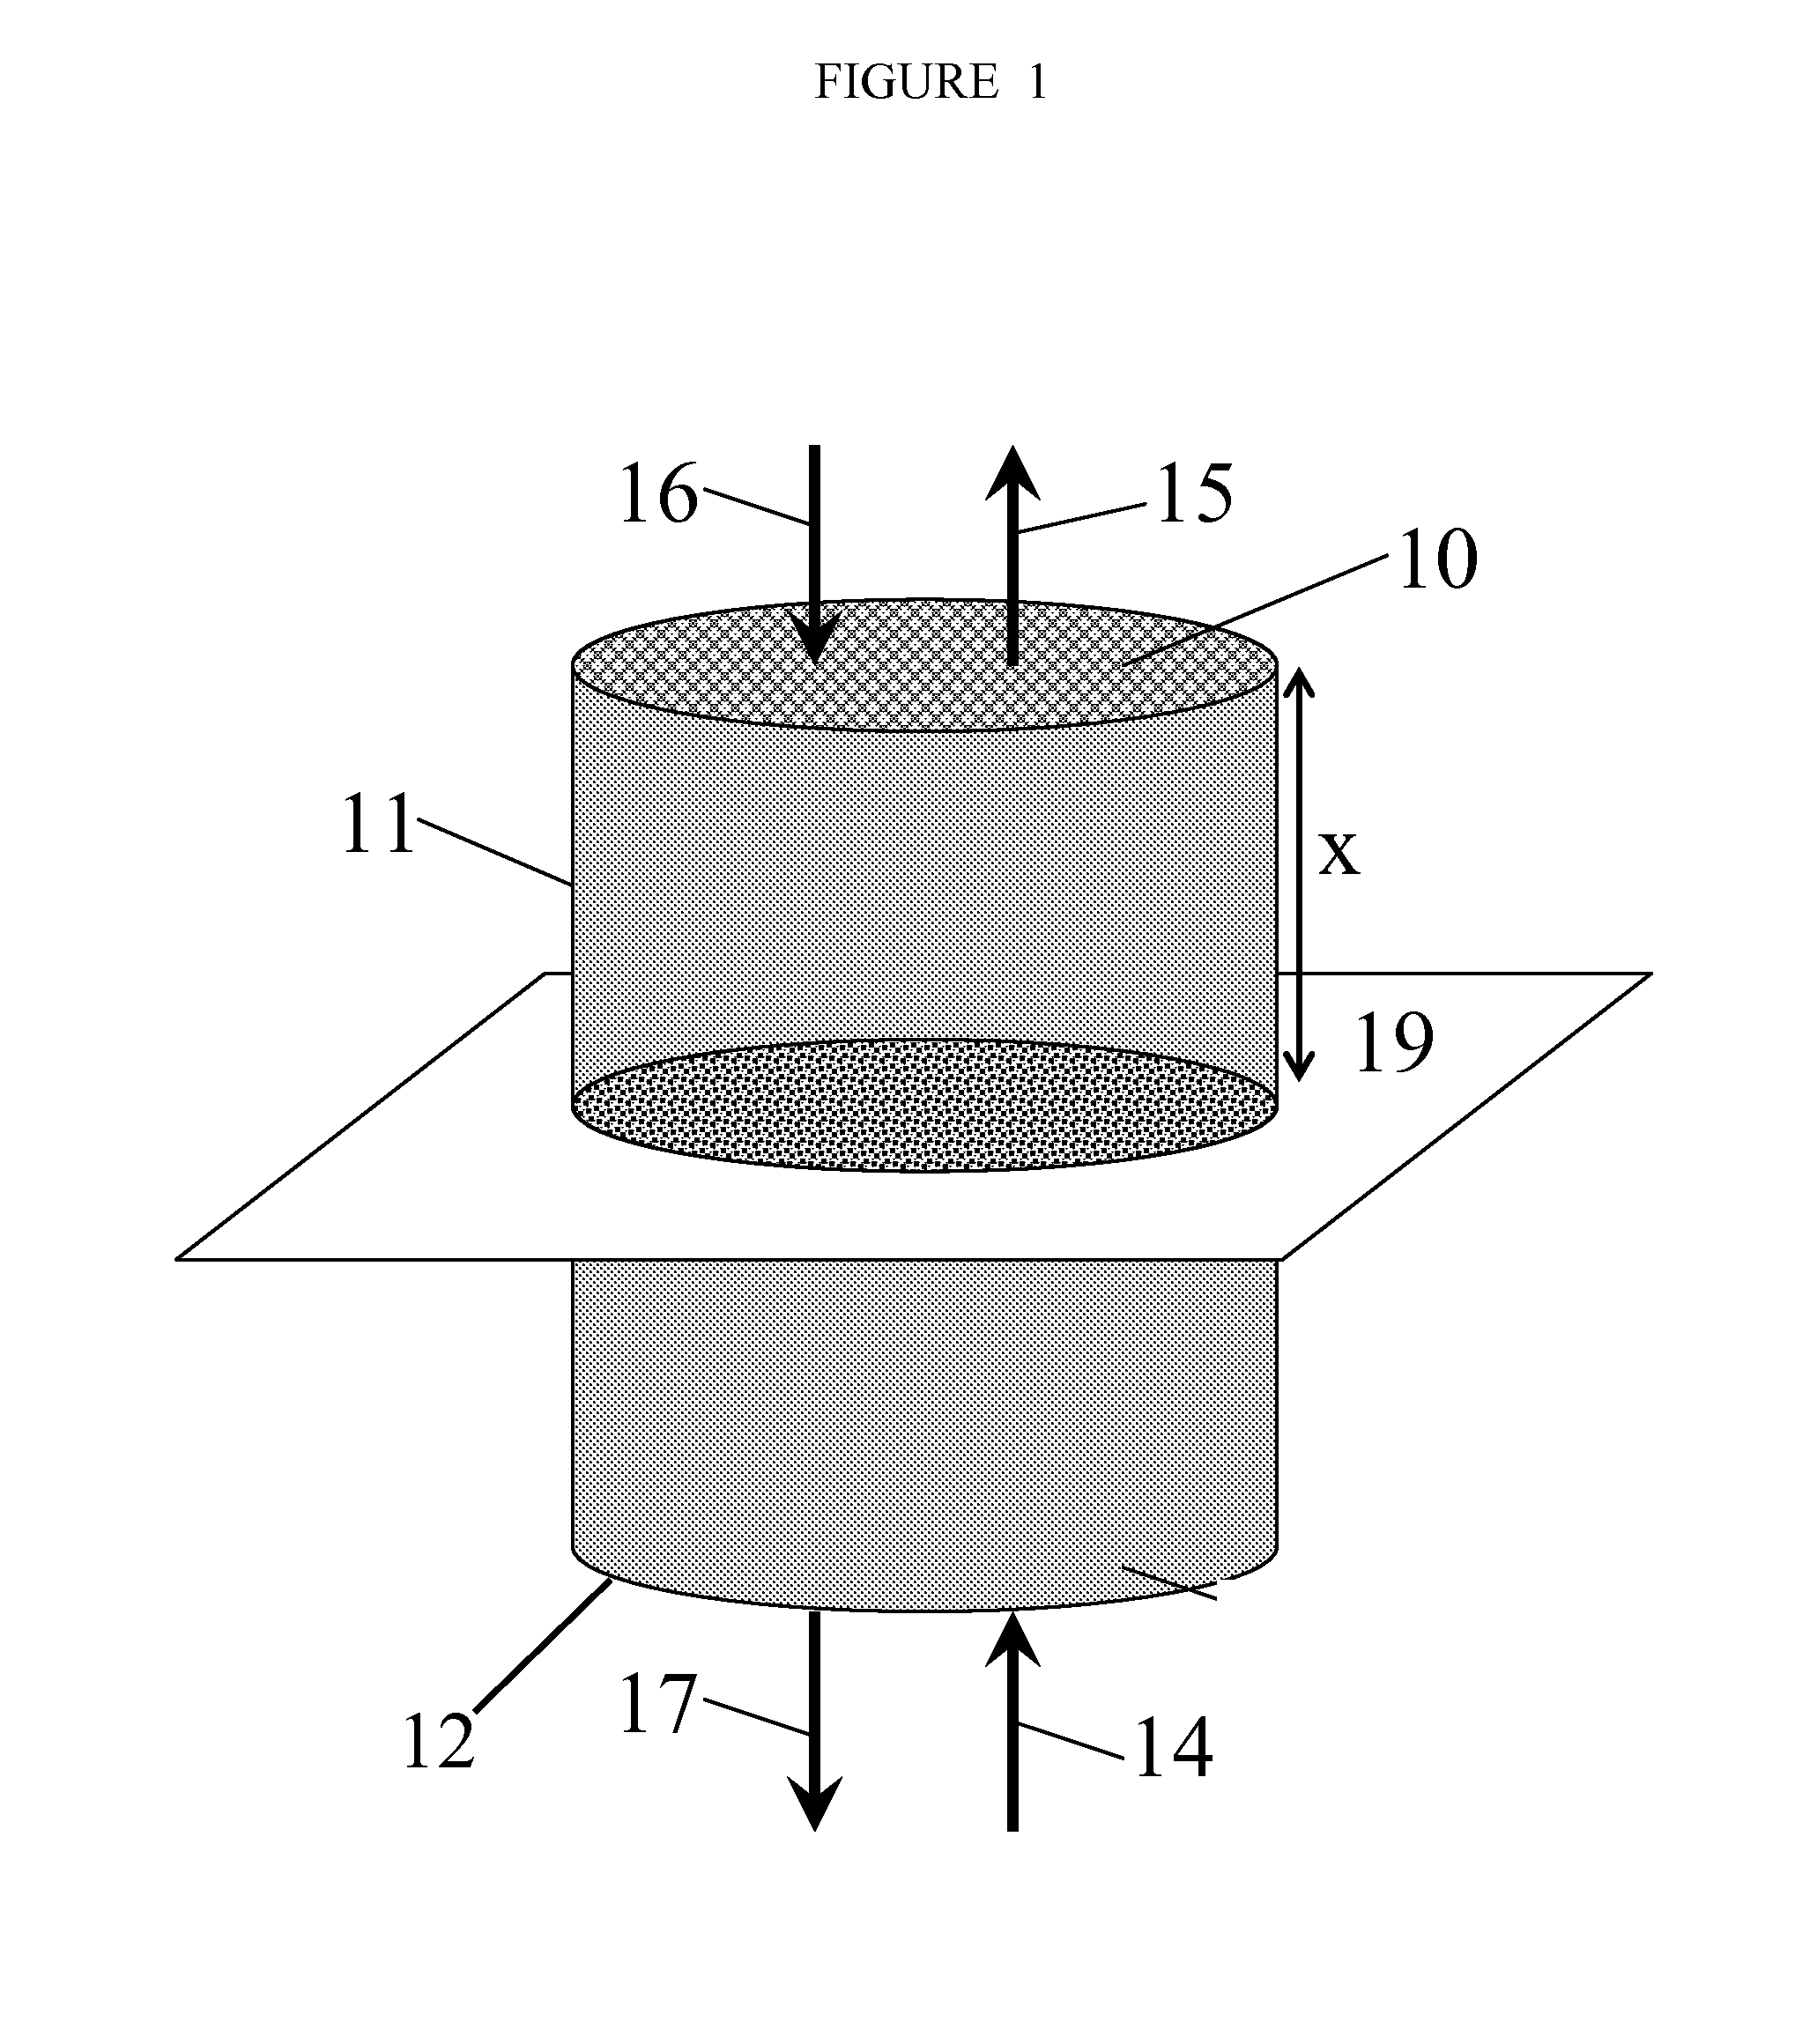 In-situ vaporizer and recuperator for alternating flow device